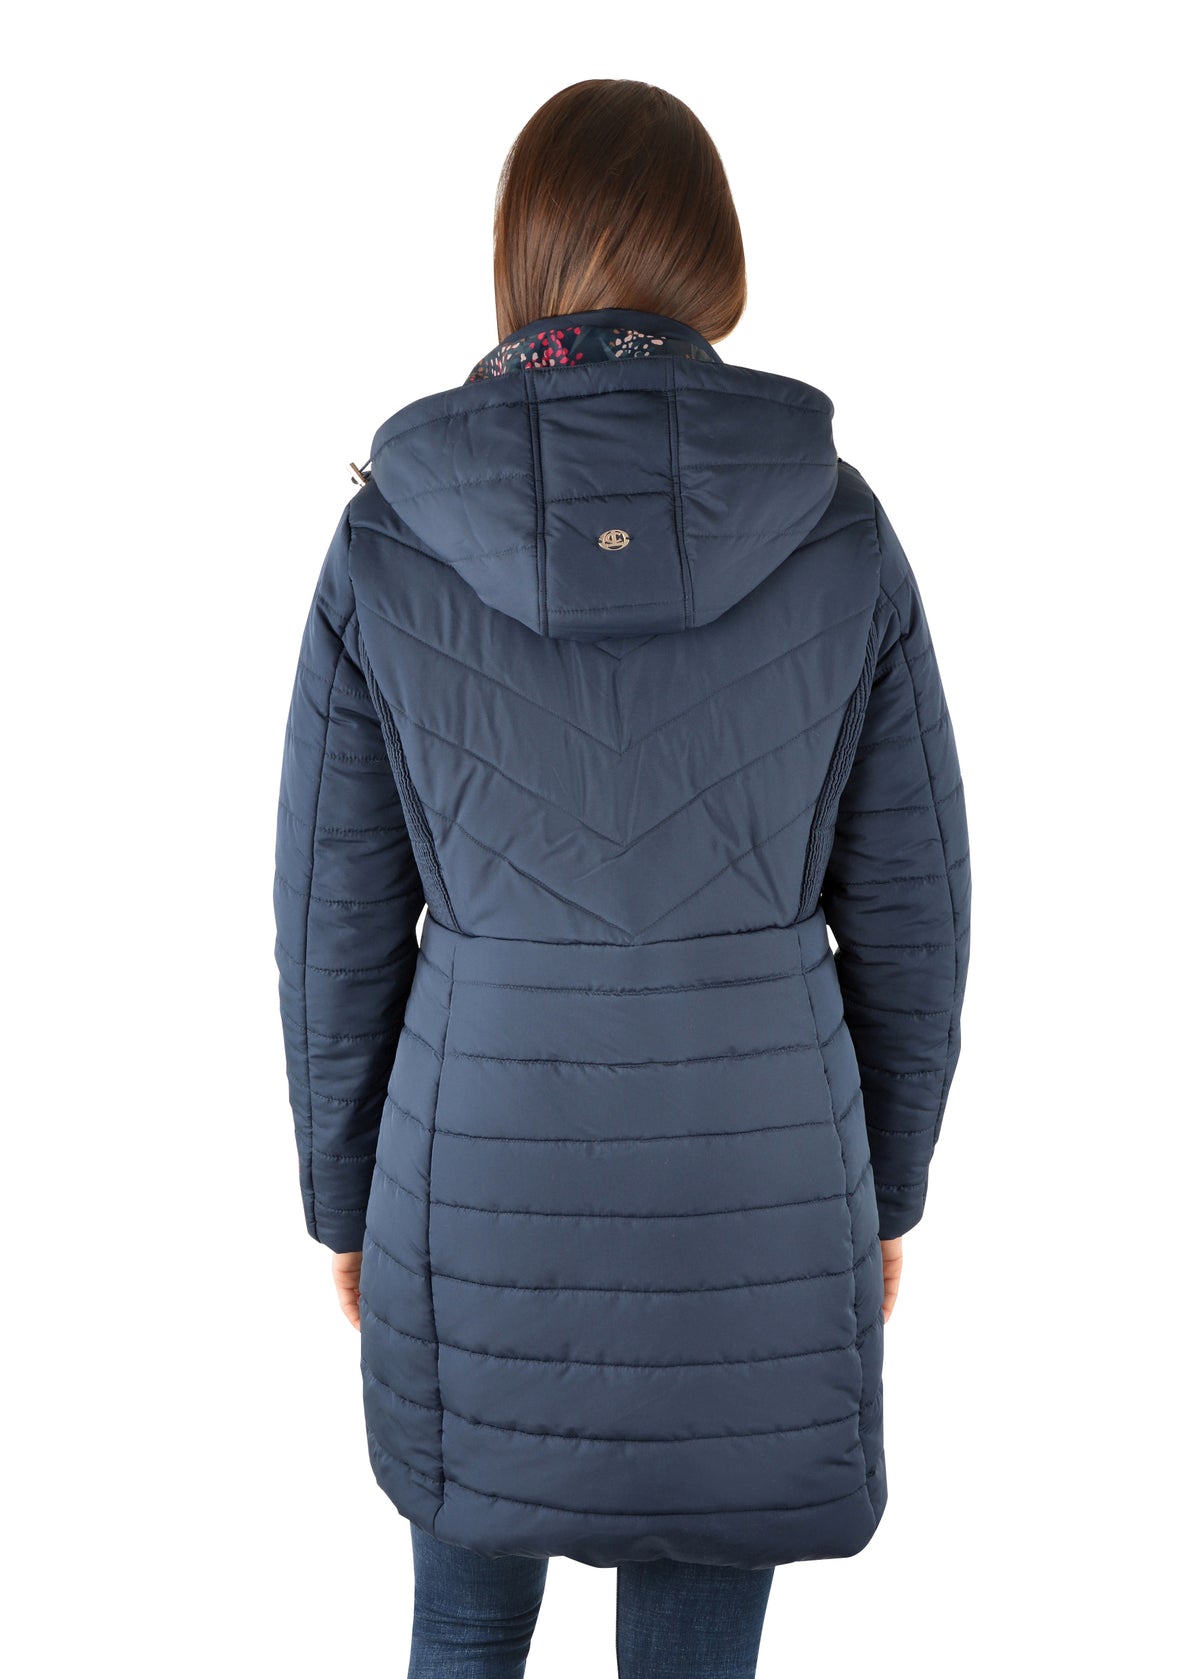 Thomas Cook Womens Mayfield Jacket - Navy